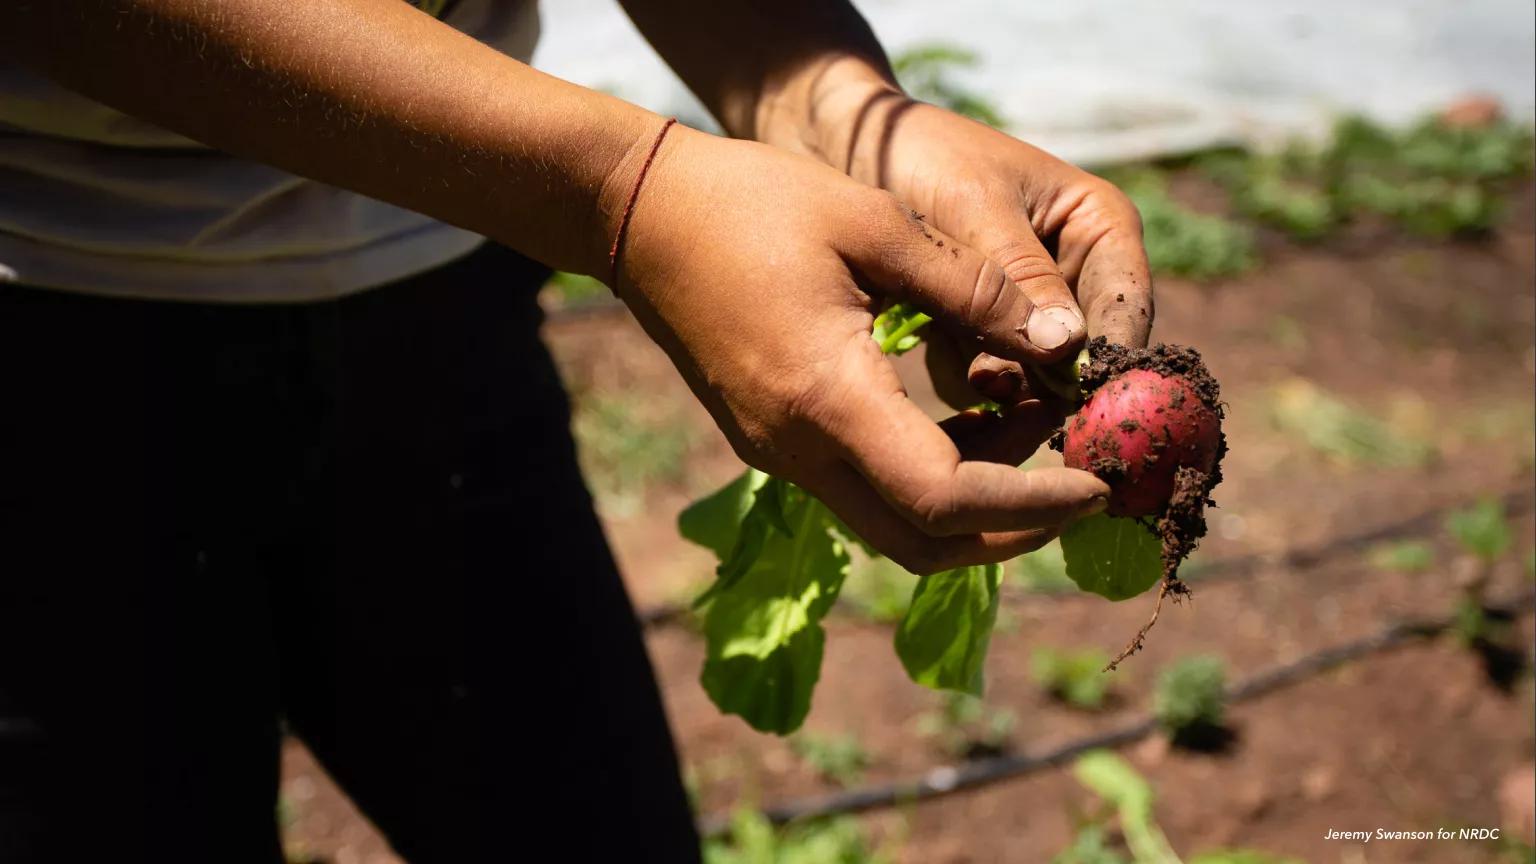 The hands of a farmer holding a freshly picked radish at Juniper Farms, located on leased public lands that are owned and managed by Pitkin County, Colorado